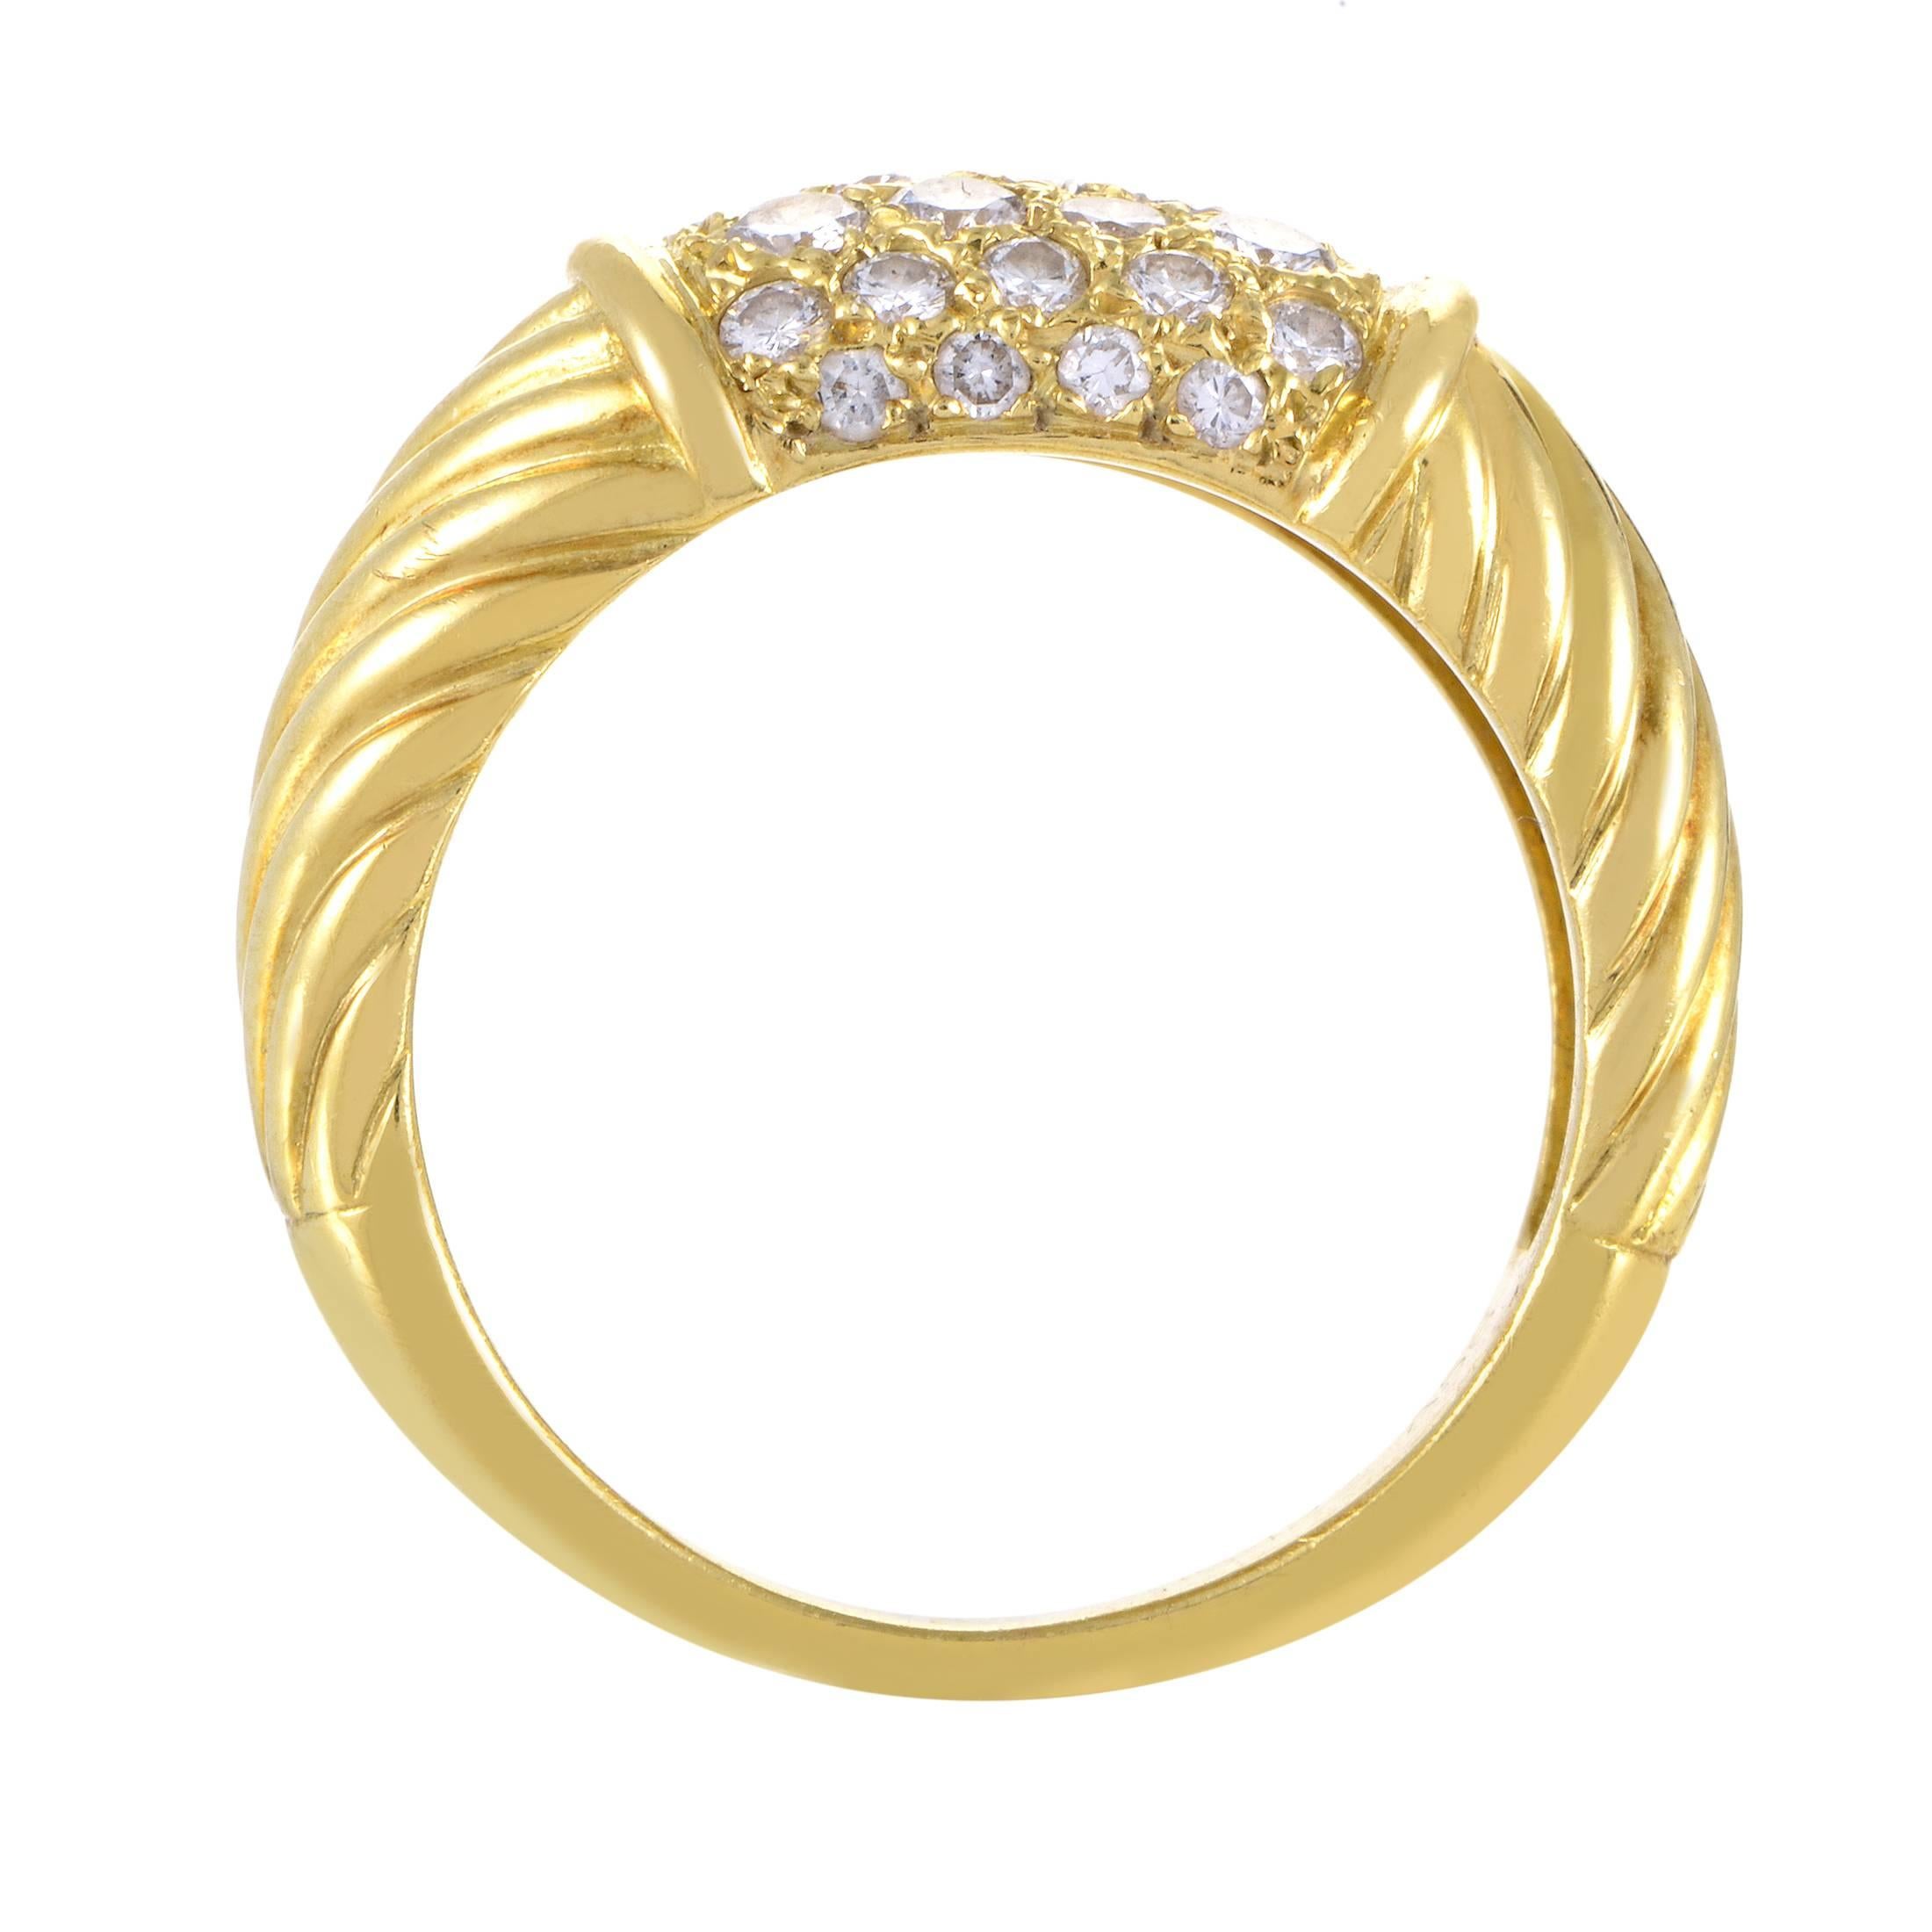 Leading up to the glamorous central spot where the refreshing brilliance of diamonds totaling 0.65ct meets the exuberant radiance of 18K yellow gold, the alluring décor of this stunning ring from Van Cleef & Arpels produces a mesmerizing